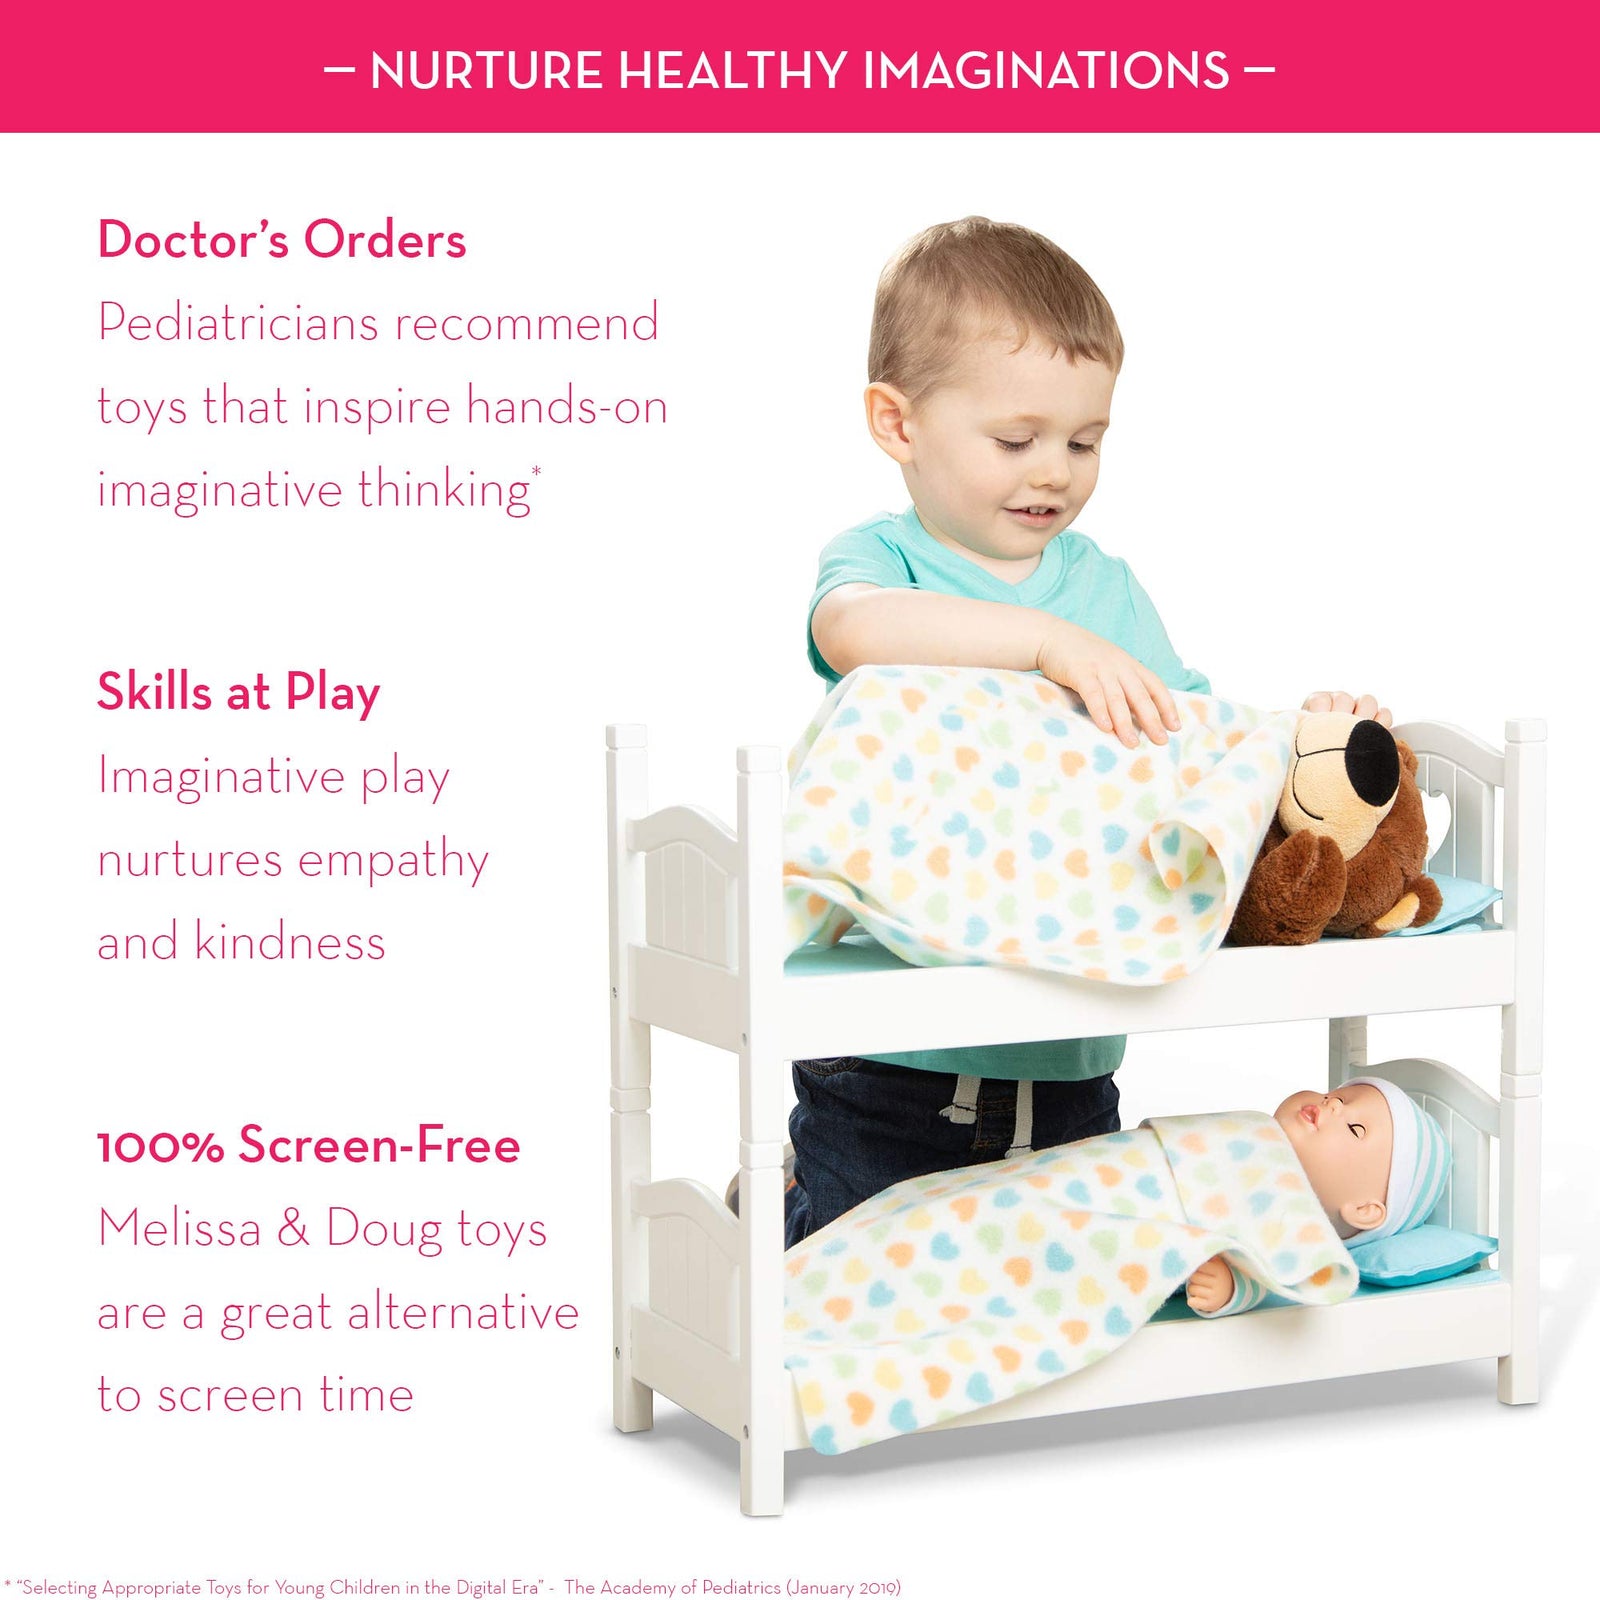 Melissa & Doug Mine to Love Wooden Play Bunk Bed for Dolls-Stuffed Animals - White (2 Beds, 17.4”H x 9.1”W x 20.7”L Assembled and Stacked)